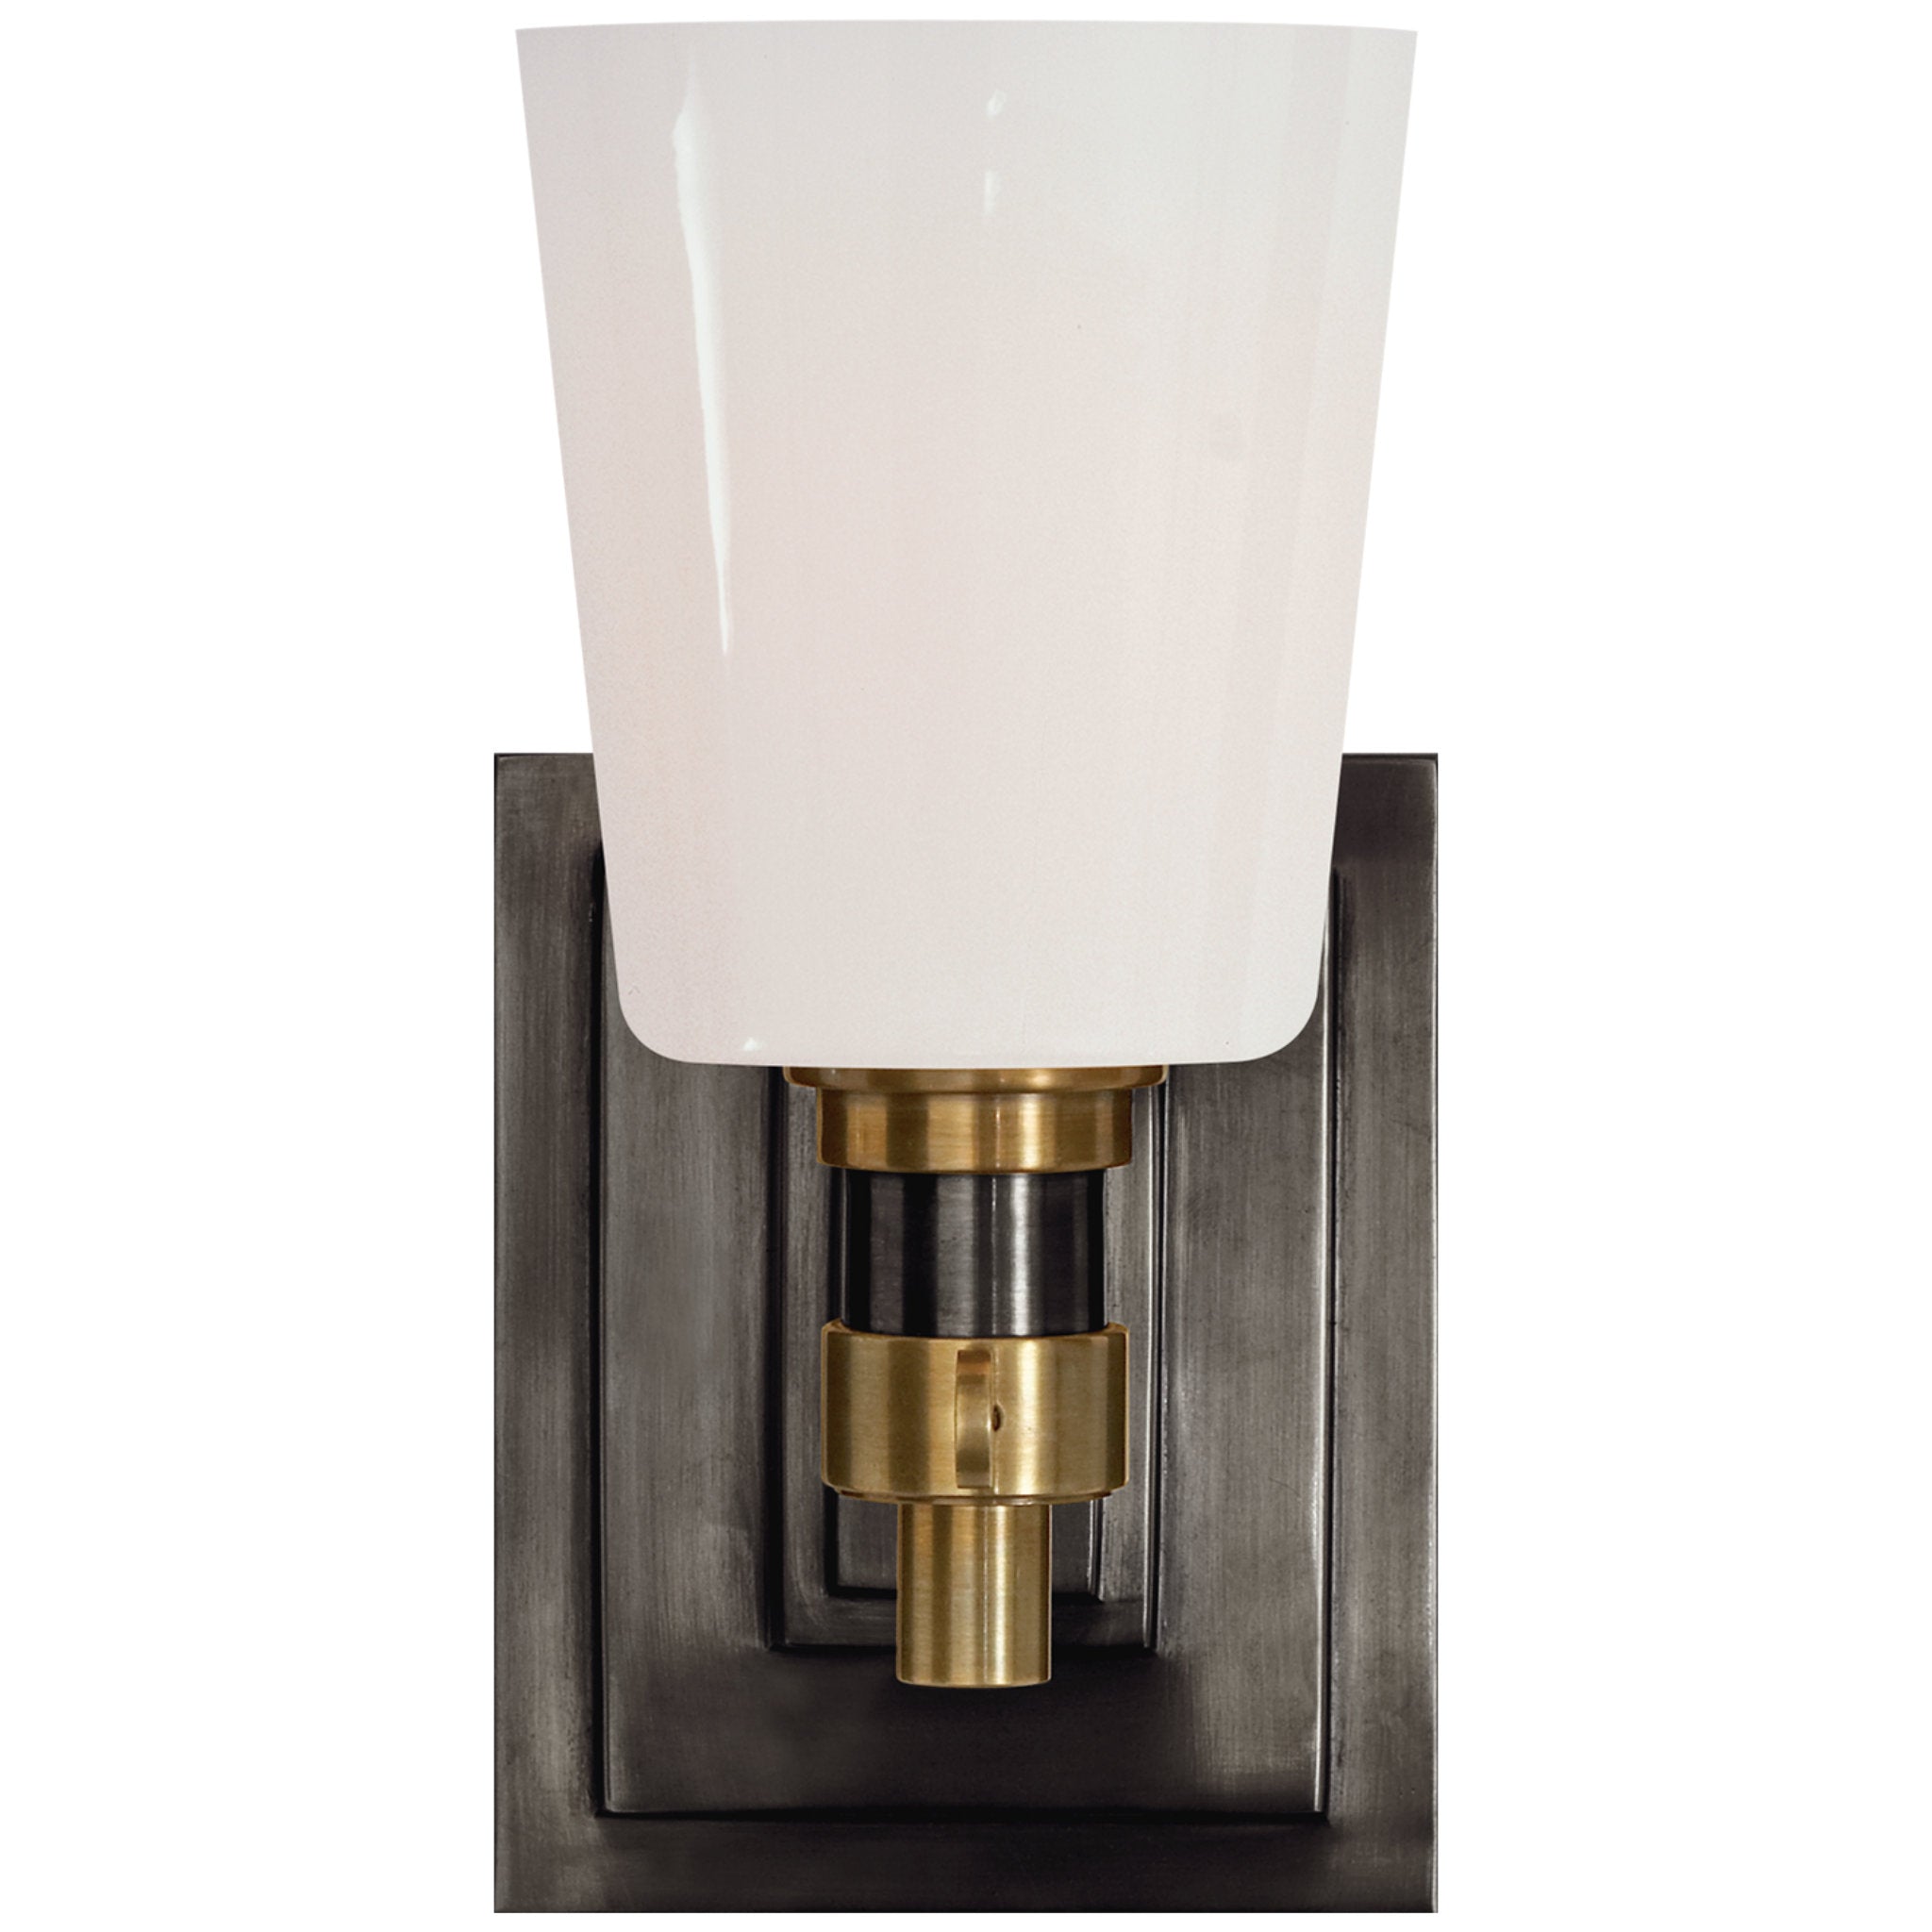 OBTOB2025BZHABNP in Bronze and Hand-rubbed Antique Brass by Visual Comfort  in Frankfort, KY - Bryant Large Double Tail Sconce in Bronze and Hand-Rubbed  Antique Brass with Natural Paper Shades Open Box